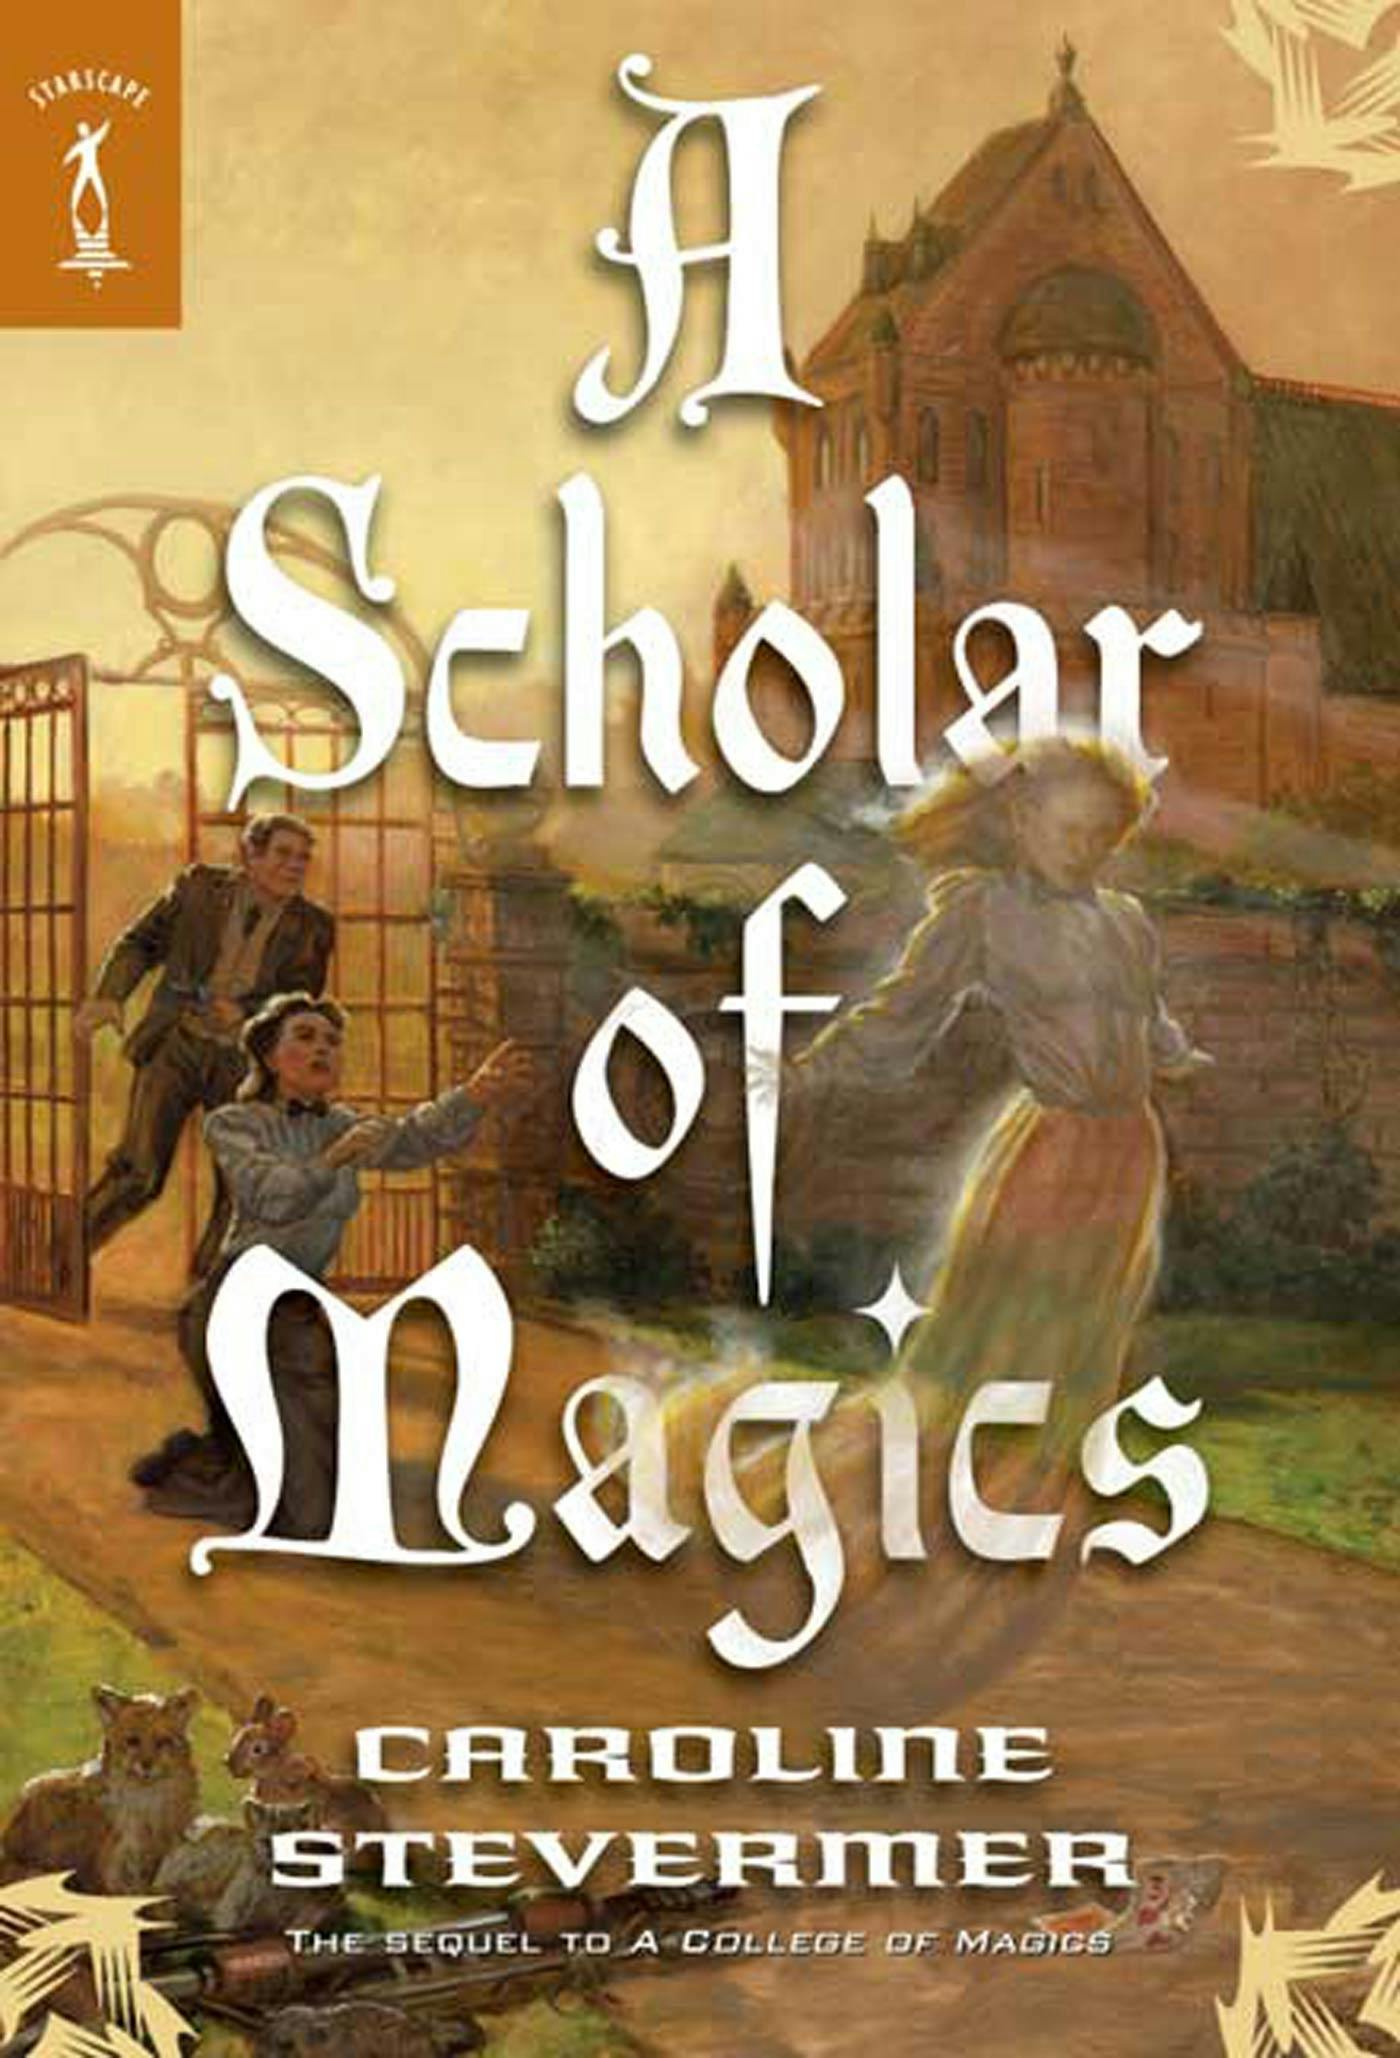 Cover for the book titled as: A Scholar of Magics